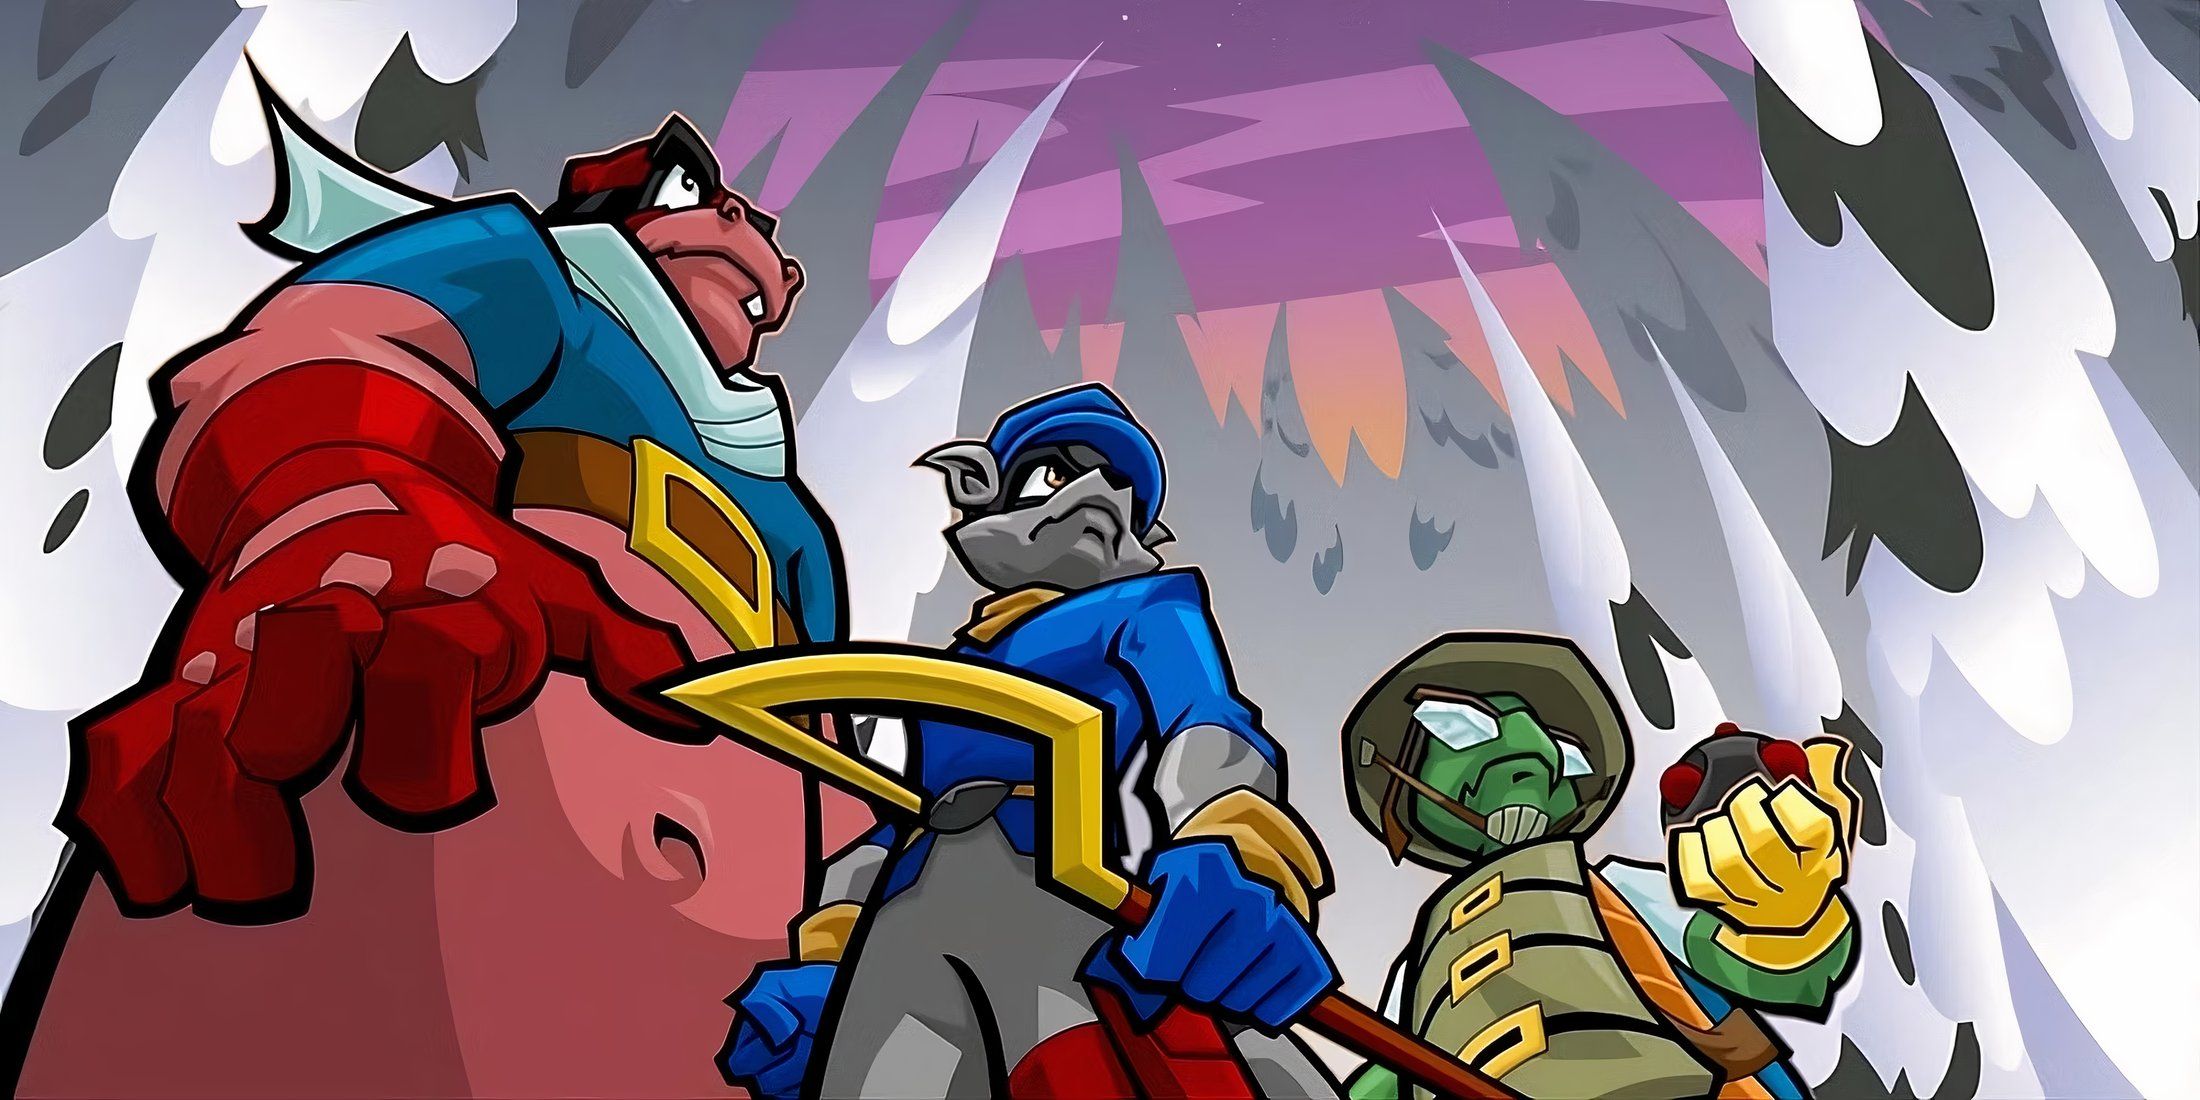 Sly Cooper and friends